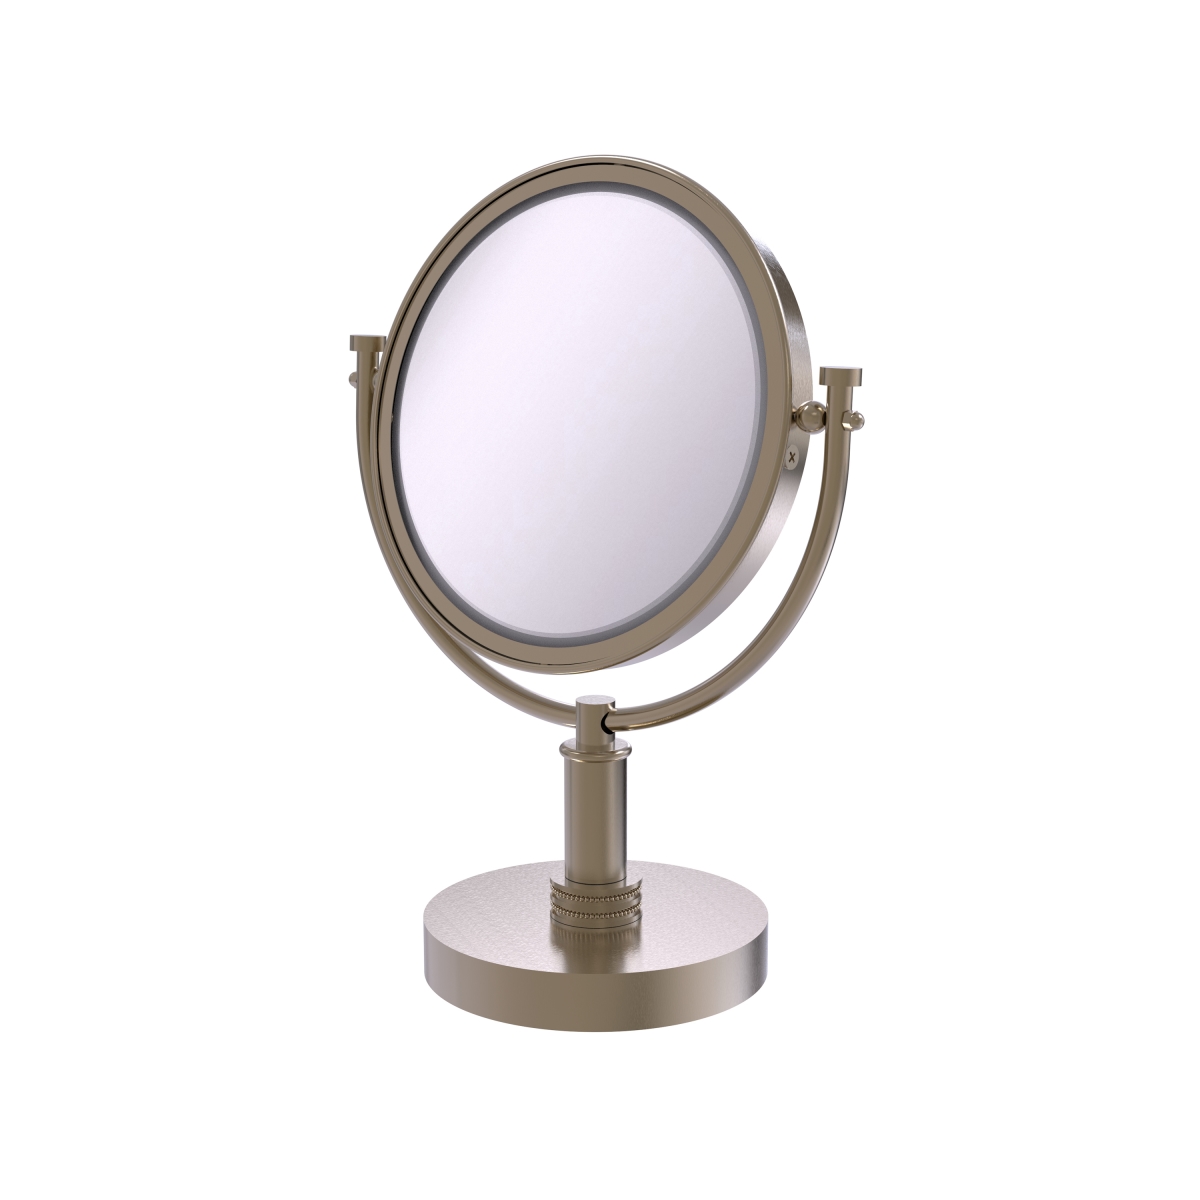 Picture of Allied Brass DM-4D-2X-PEW 8 in. Vanity Top Make-Up Mirror 2X Magnification, Antique Pewter - 15 x 8 x 8 in.